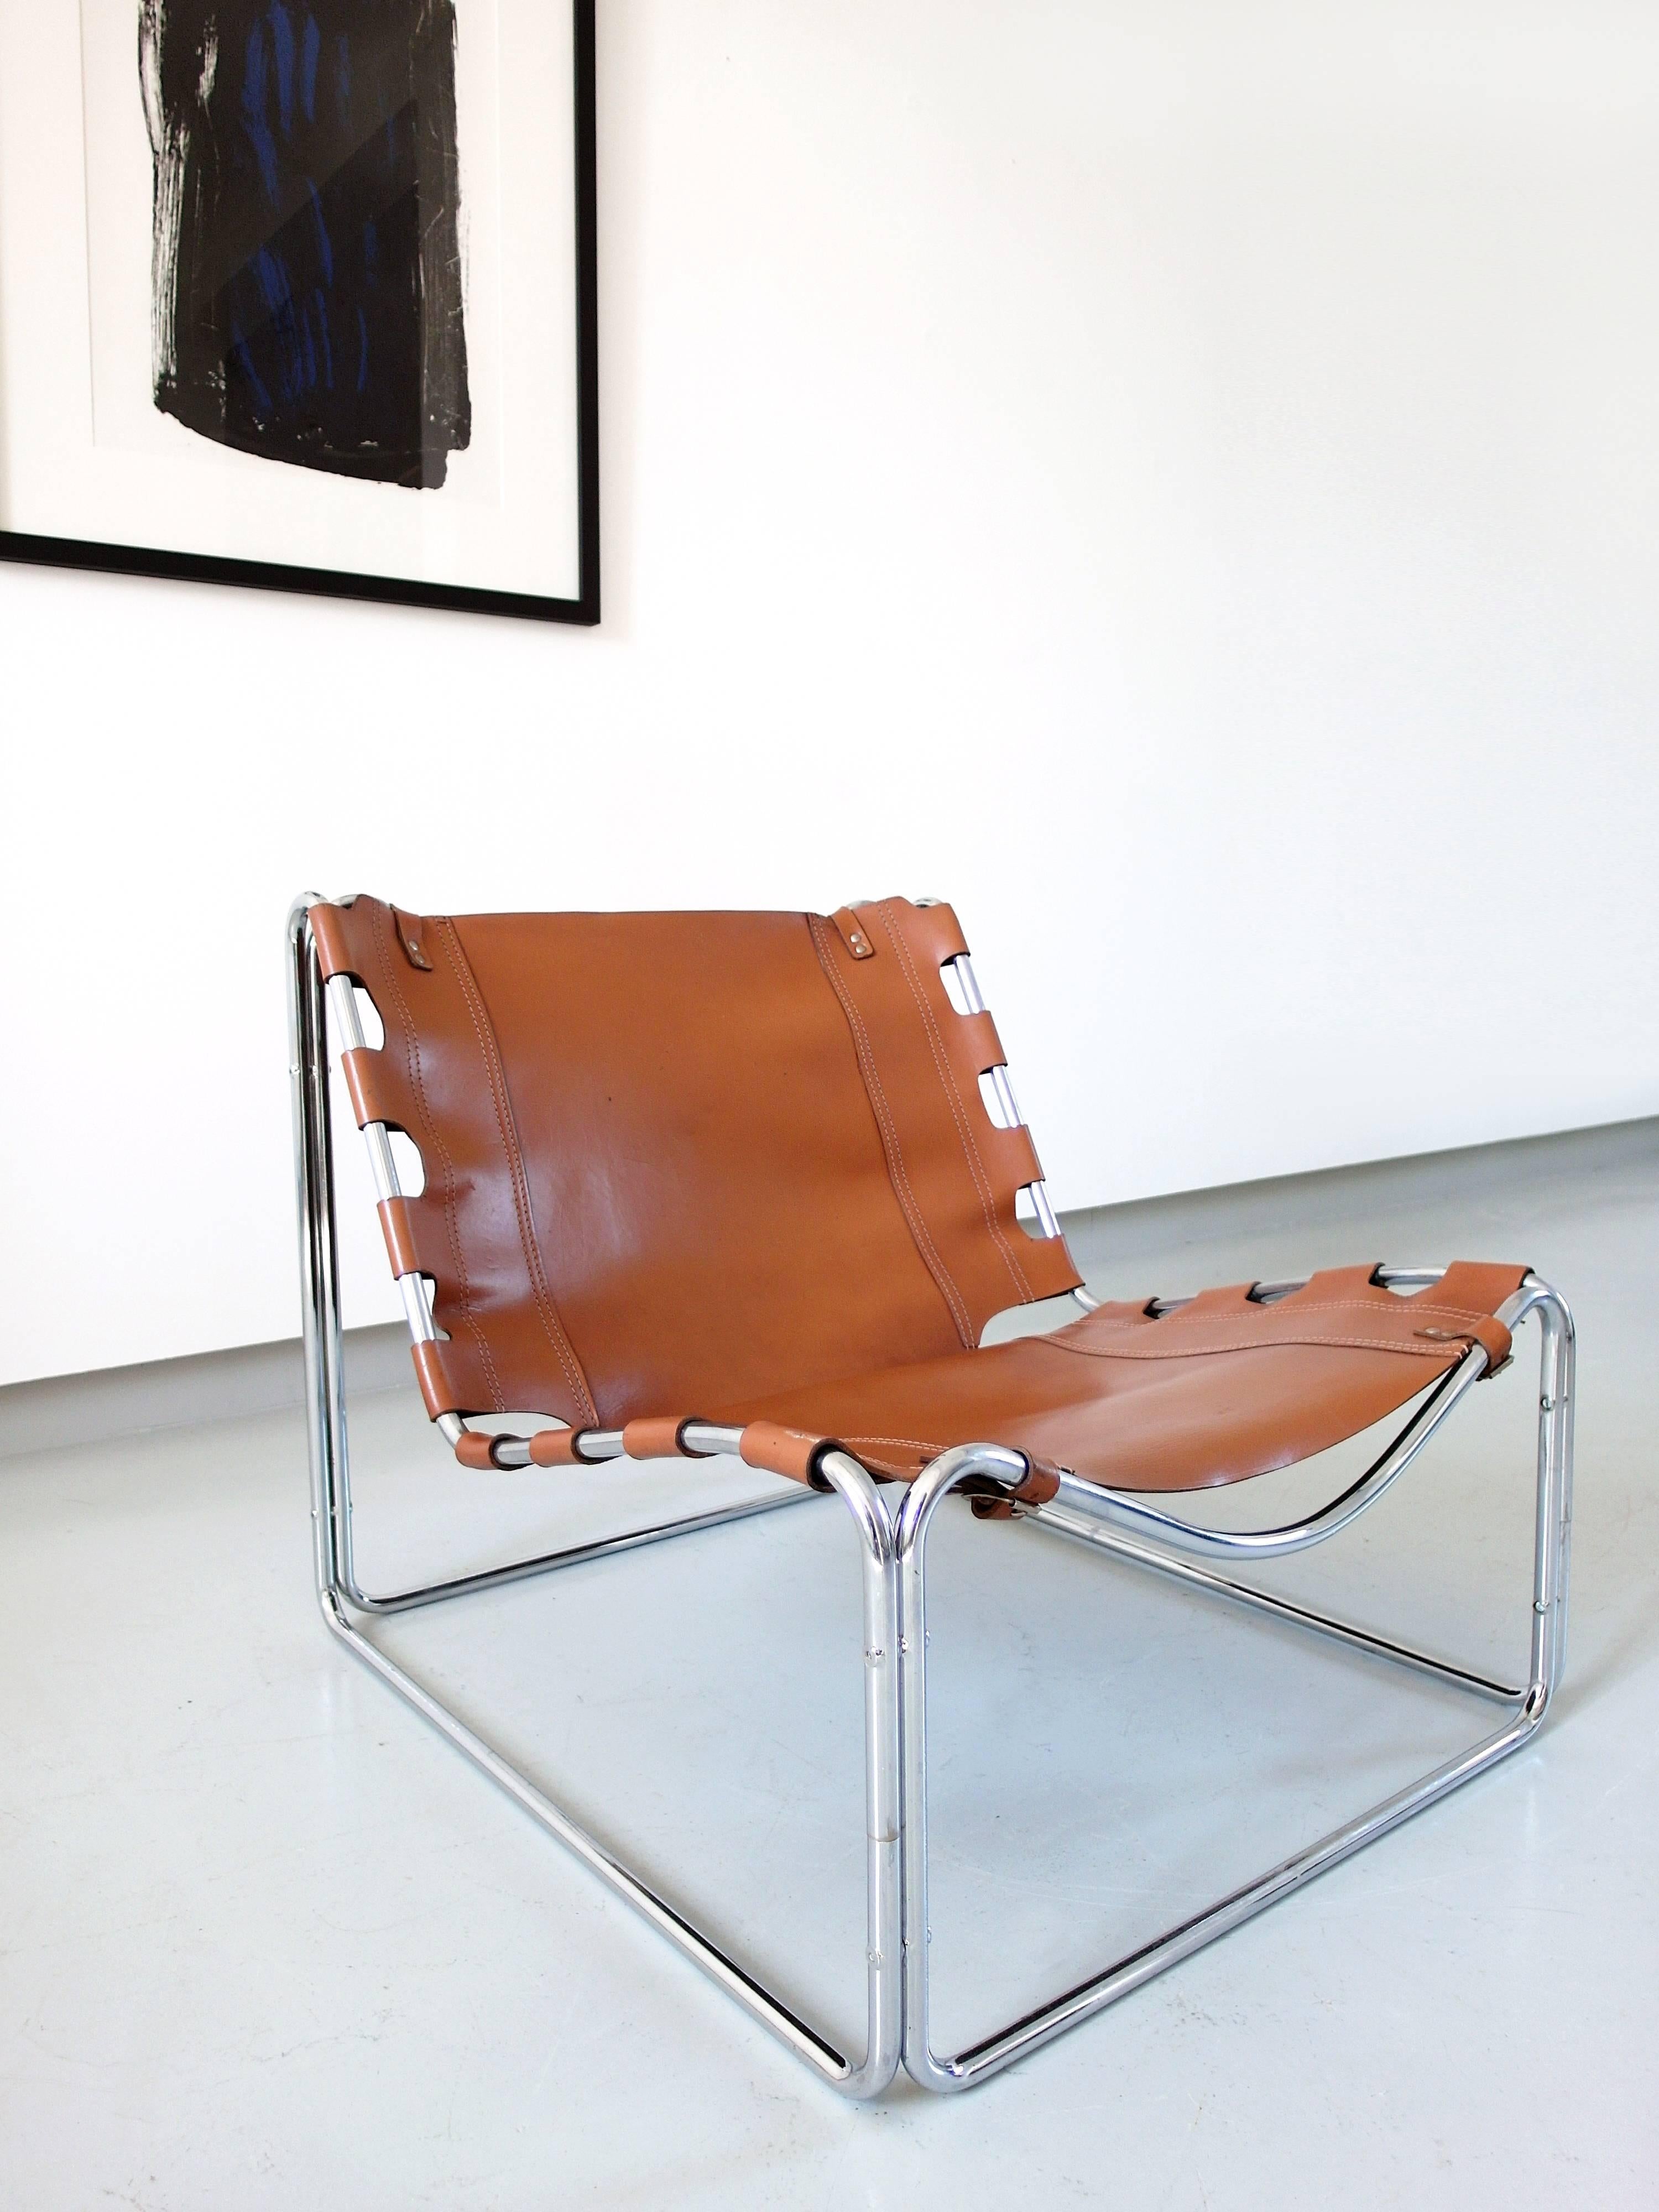 A cognac leather 'Fabio' lounge chair designed by Pascal Mourgue for Sedia-Steiner, France, 1970. A rare lounge chair since it was only produced in small edition. It has been made of chrome-plated bent tubular metal and has a spacious wide shape